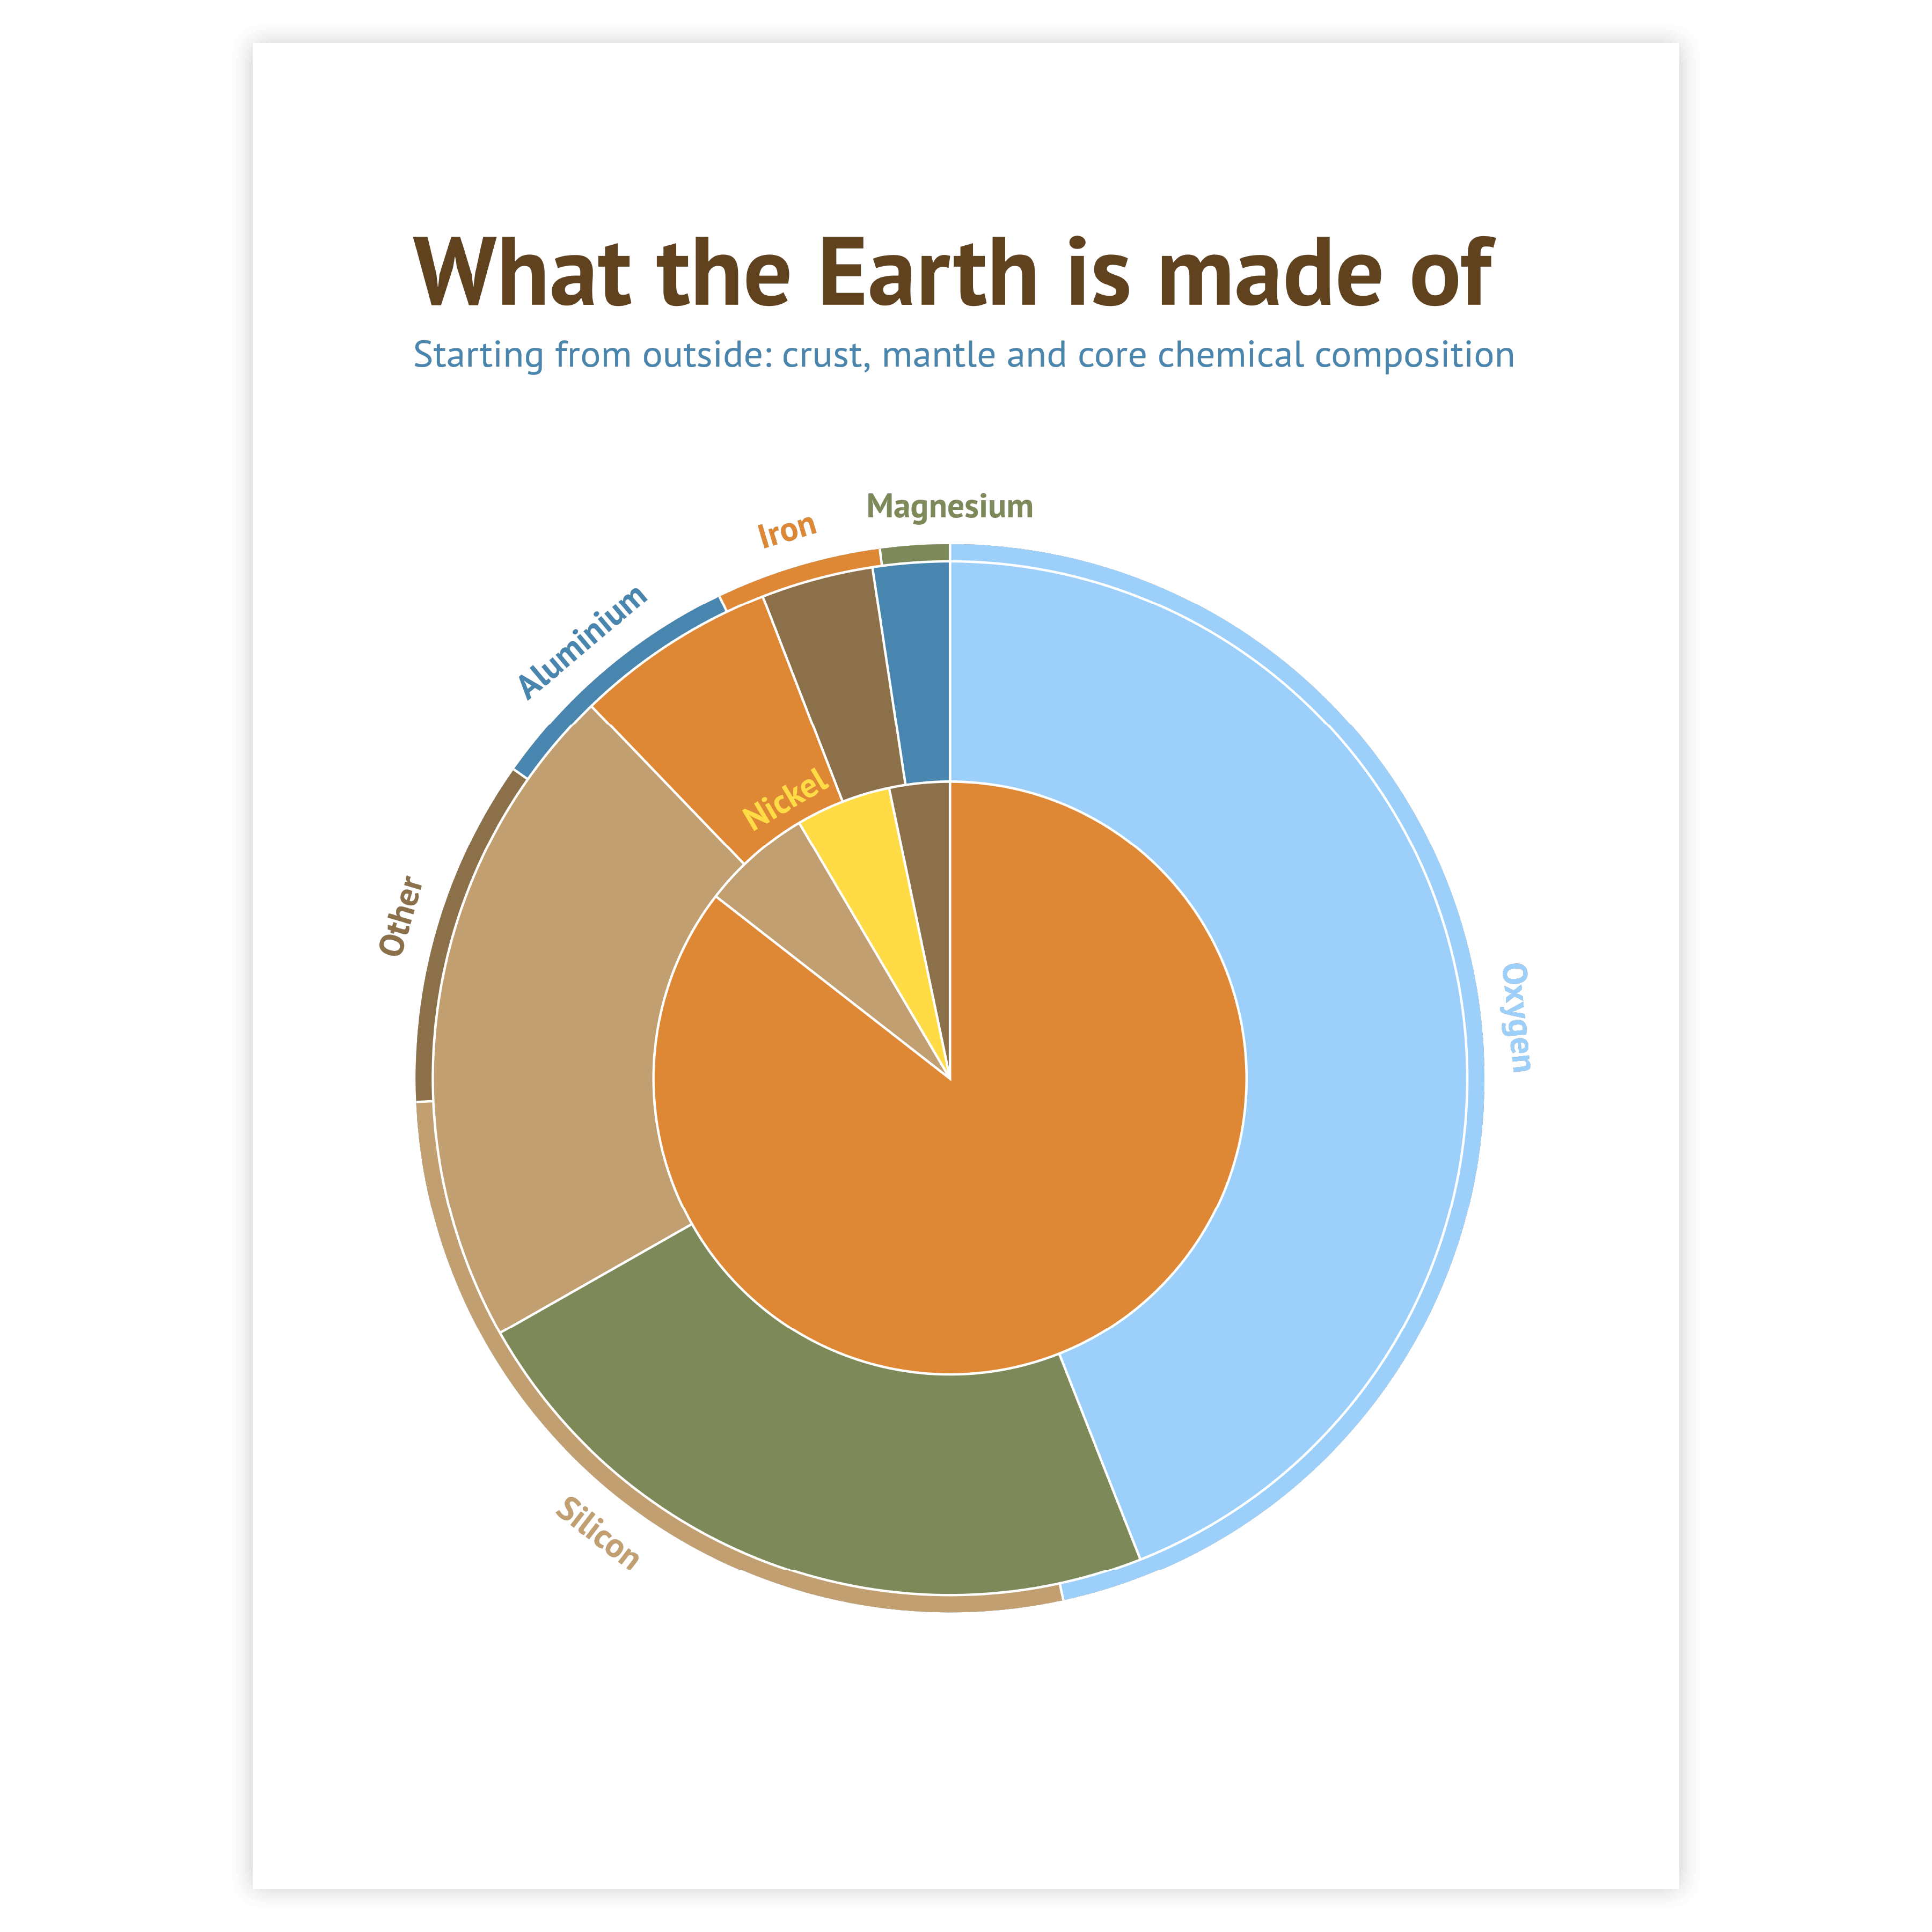 Sample of pie charts - get inspired and use this sample to design your own pie chart!